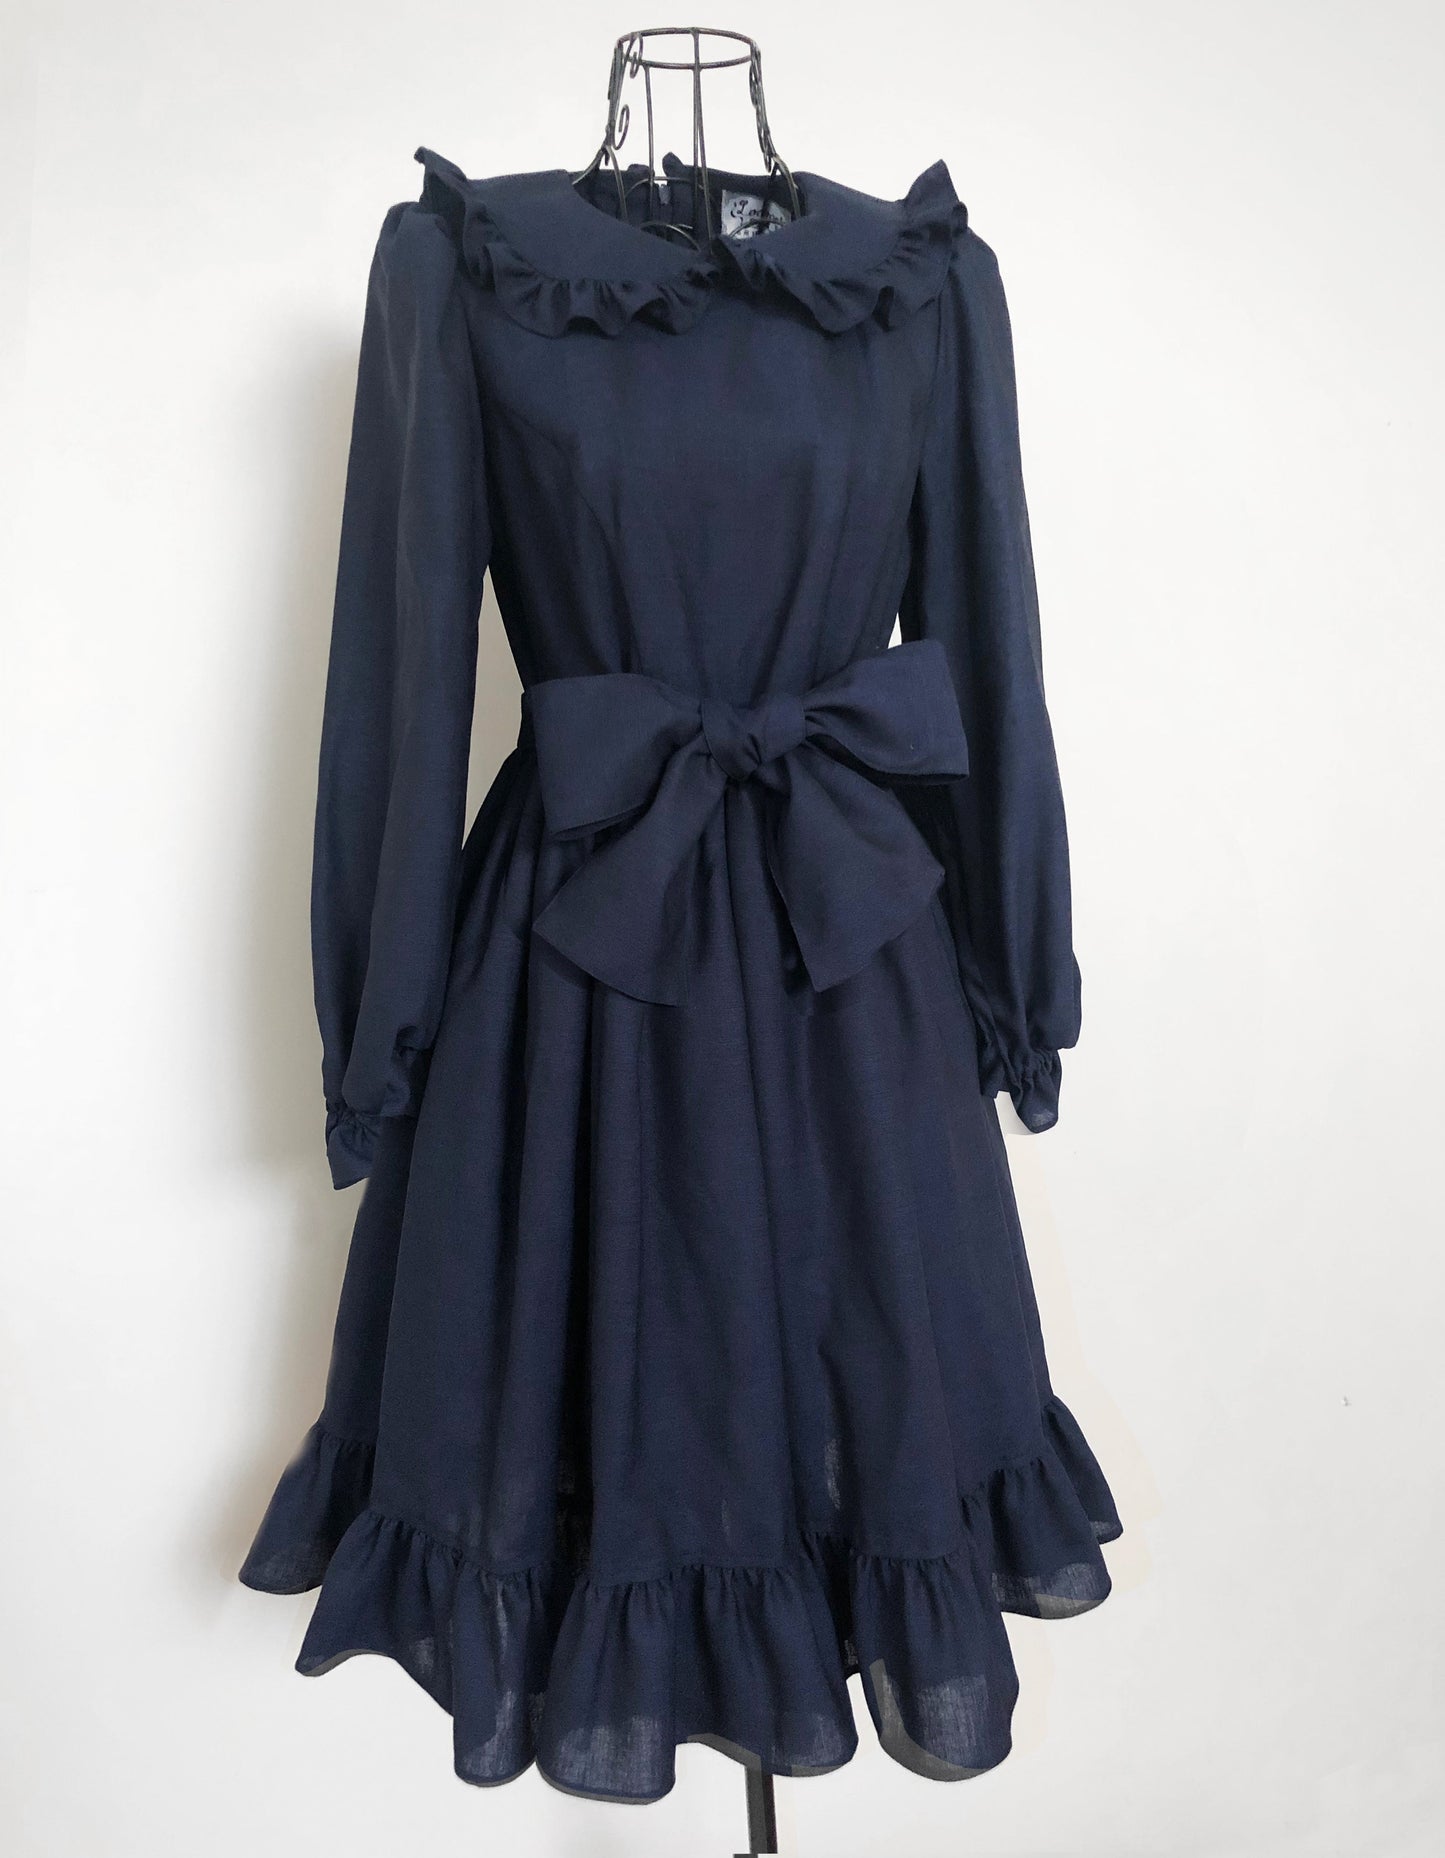 [Bishu Lolita] A special everyday dress that will make you a princess forever (dark blue long sleeves)